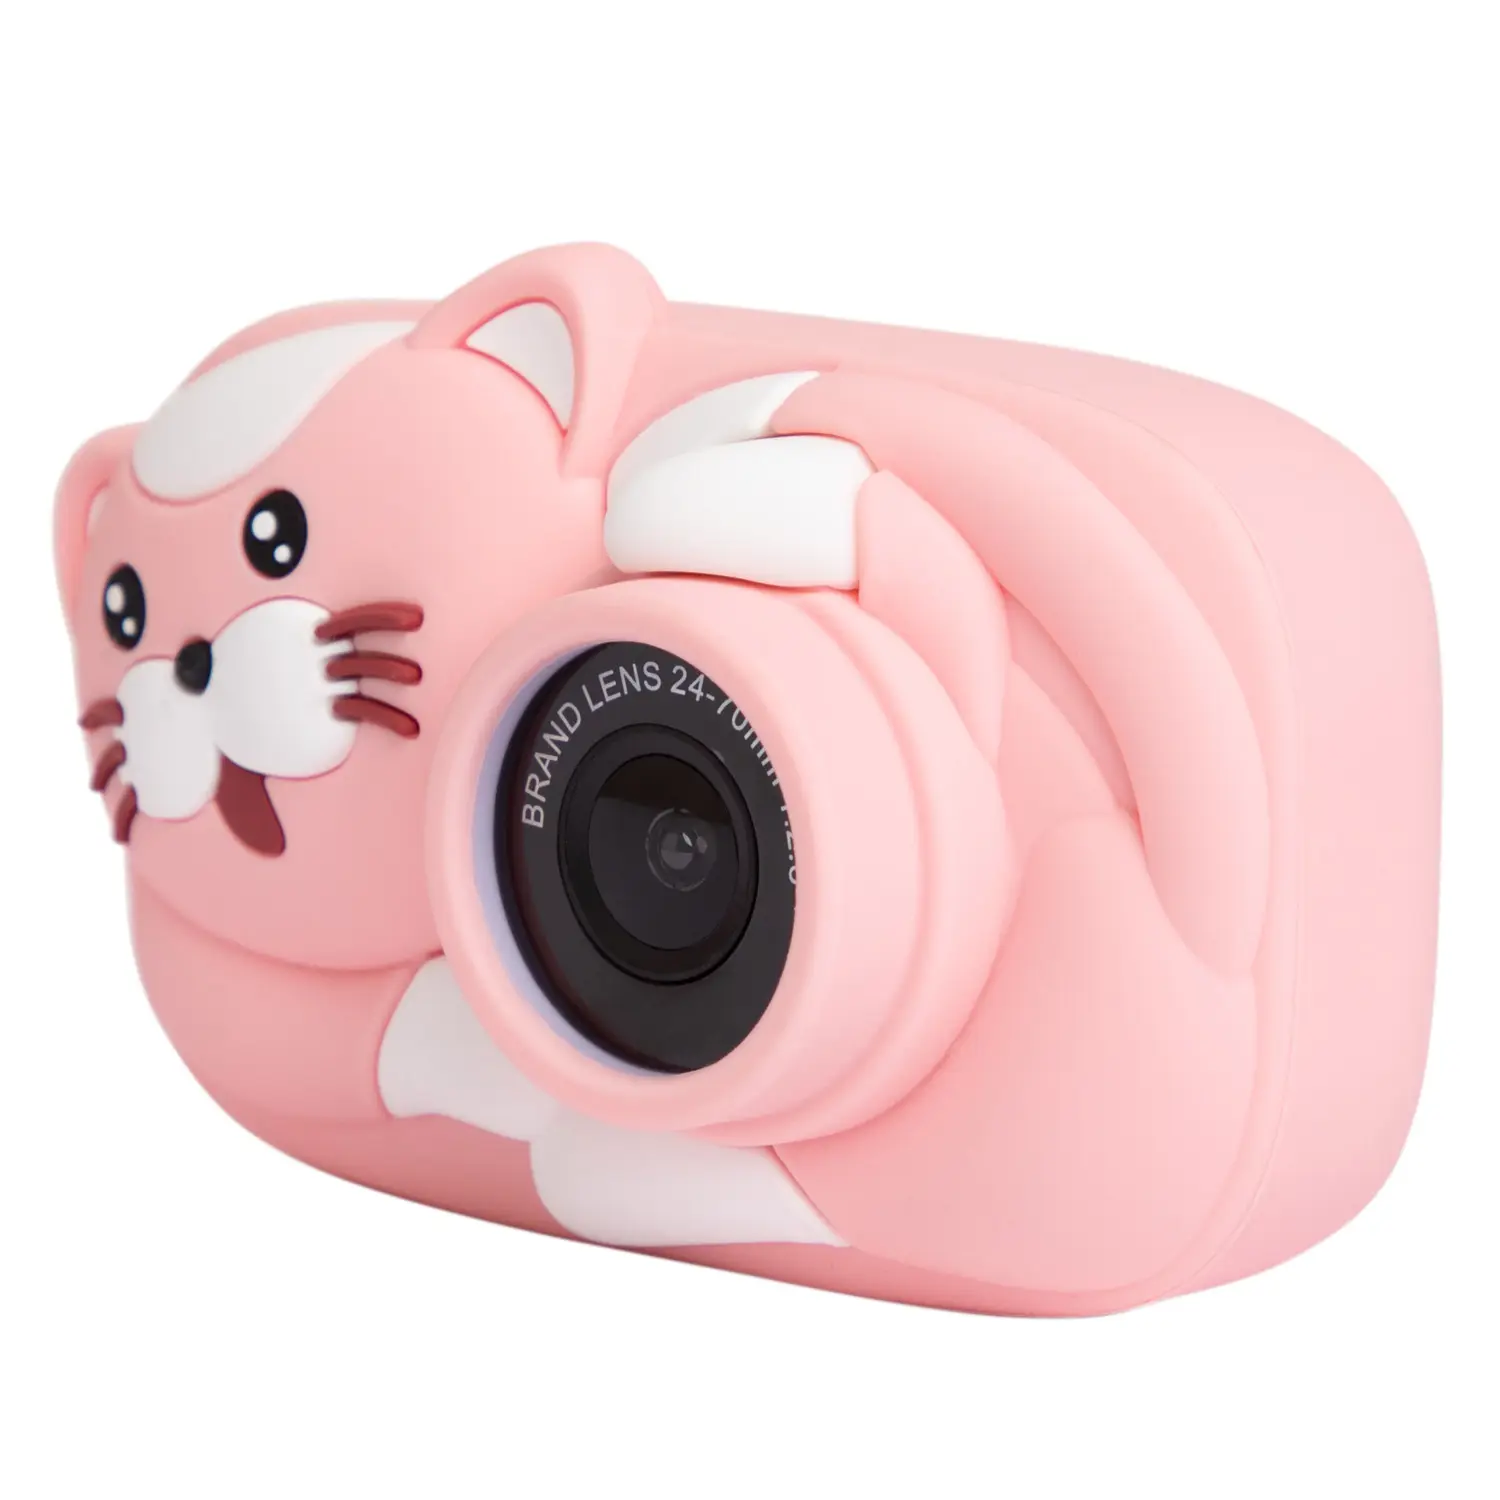 Digital 2.4 Inch Children Flexible Camera Toy Video Security Mini Photo Safe Video Action Kid Camera